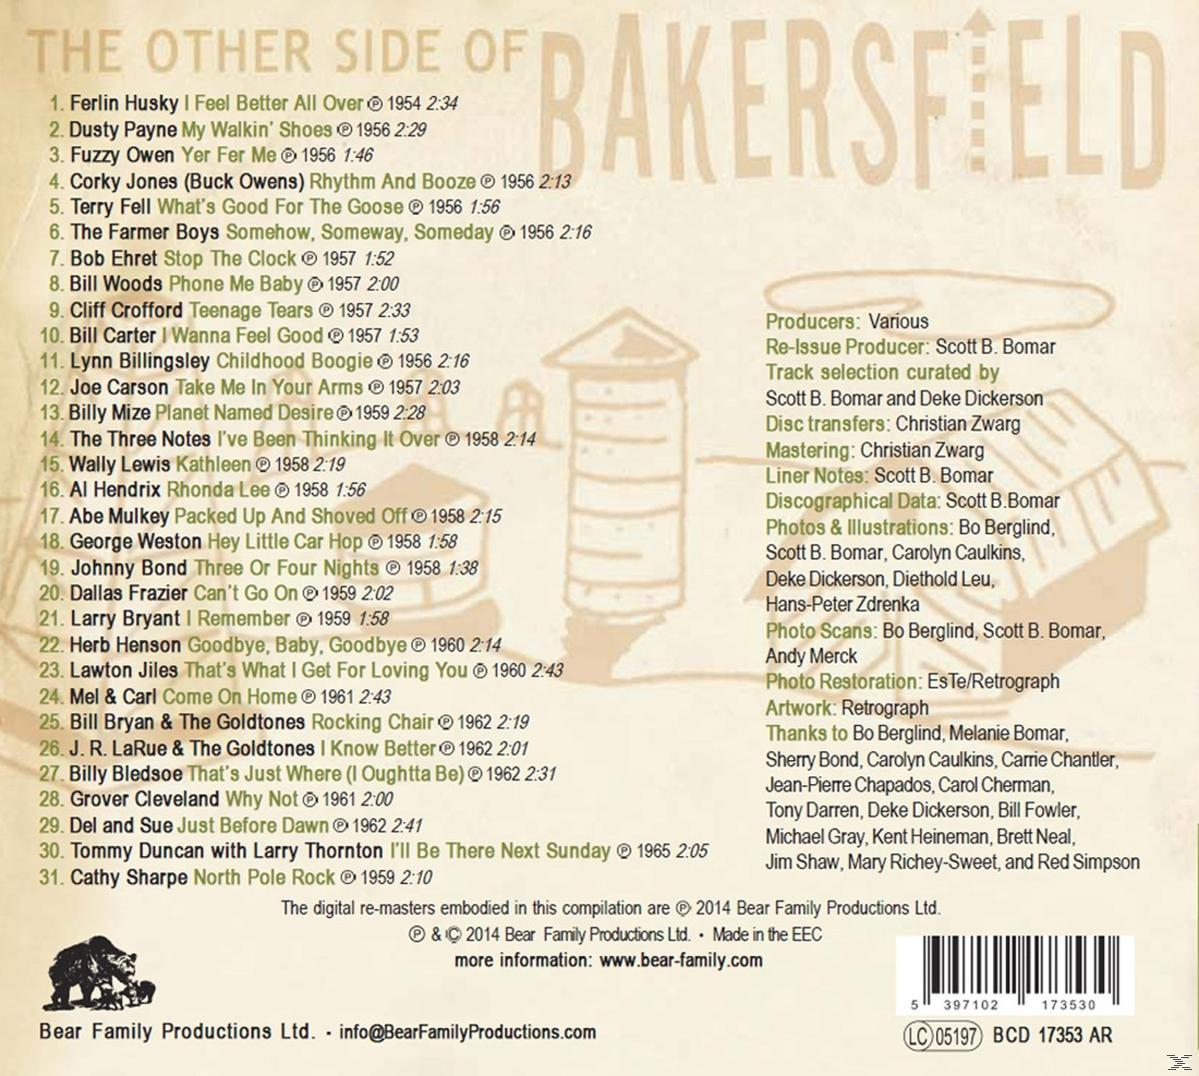 VARIOUS - Vol.2 Other Side - Of Bakersfield, (CD) The